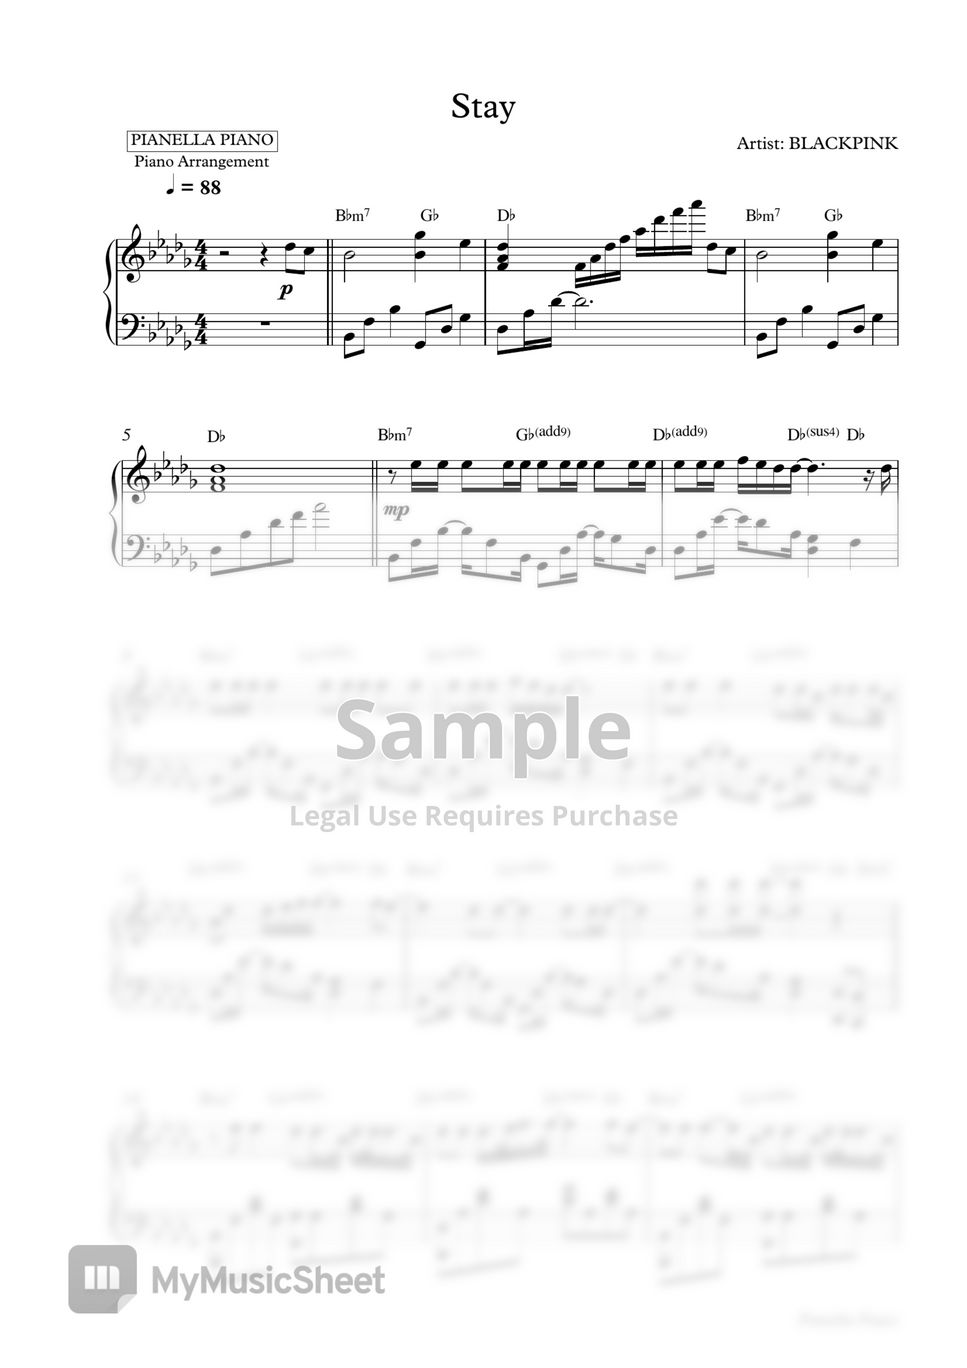 BLACKPINK - [Package B] 6 Piano Sheets only $25 by Pianella Piano